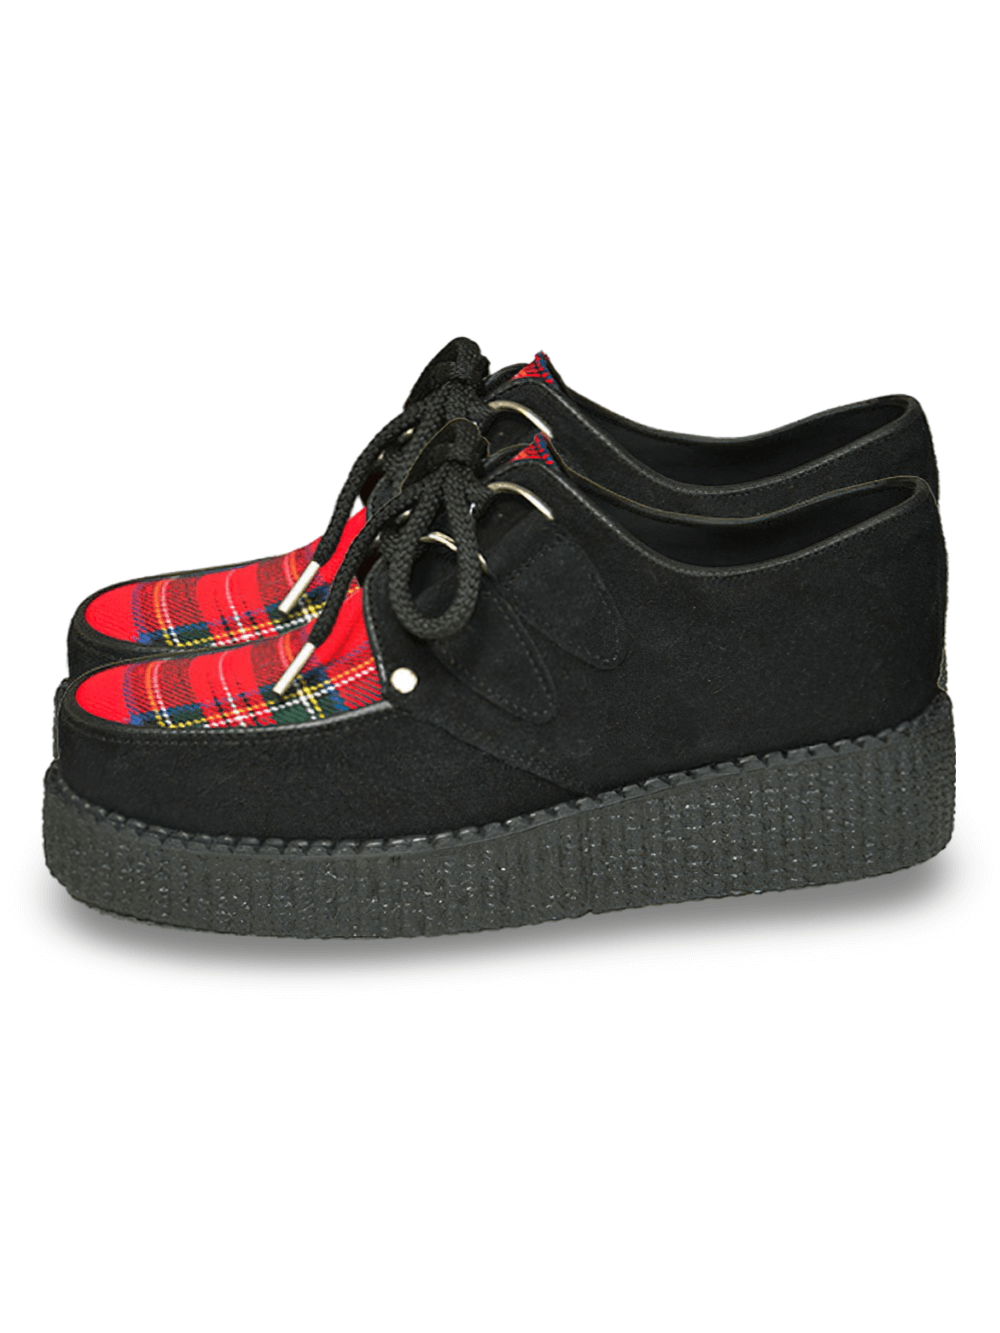 Trendy Red And Black Tartan Fabric Creepers Unisex